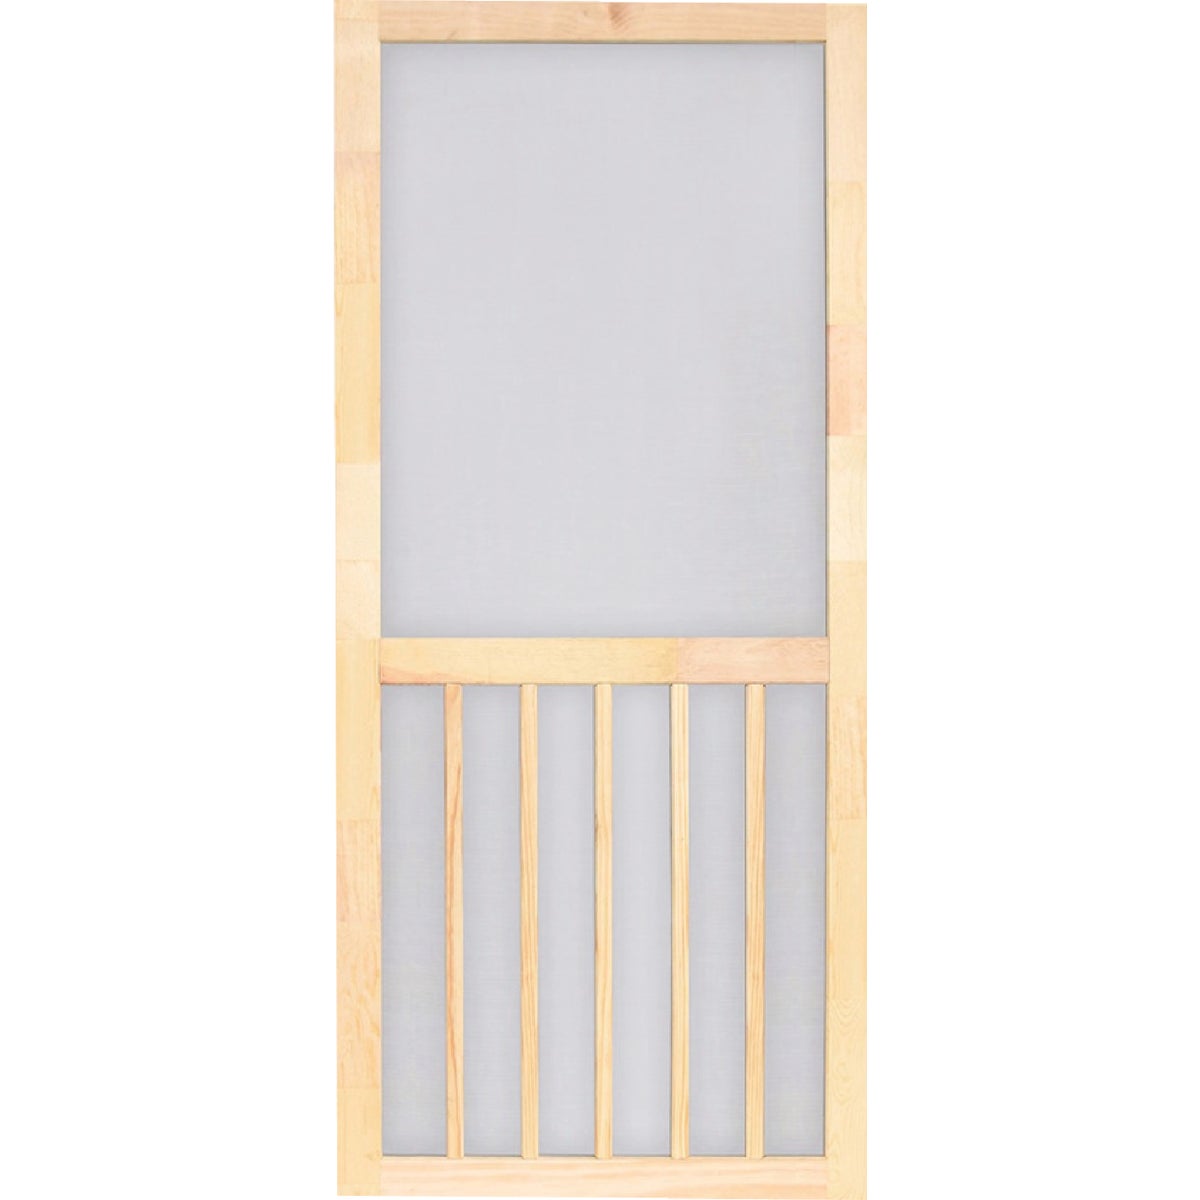 Screen Tight 5-Bar 36 In. W x 80 In. H x 1 In. Thick Natural Wood Screen Door Screen